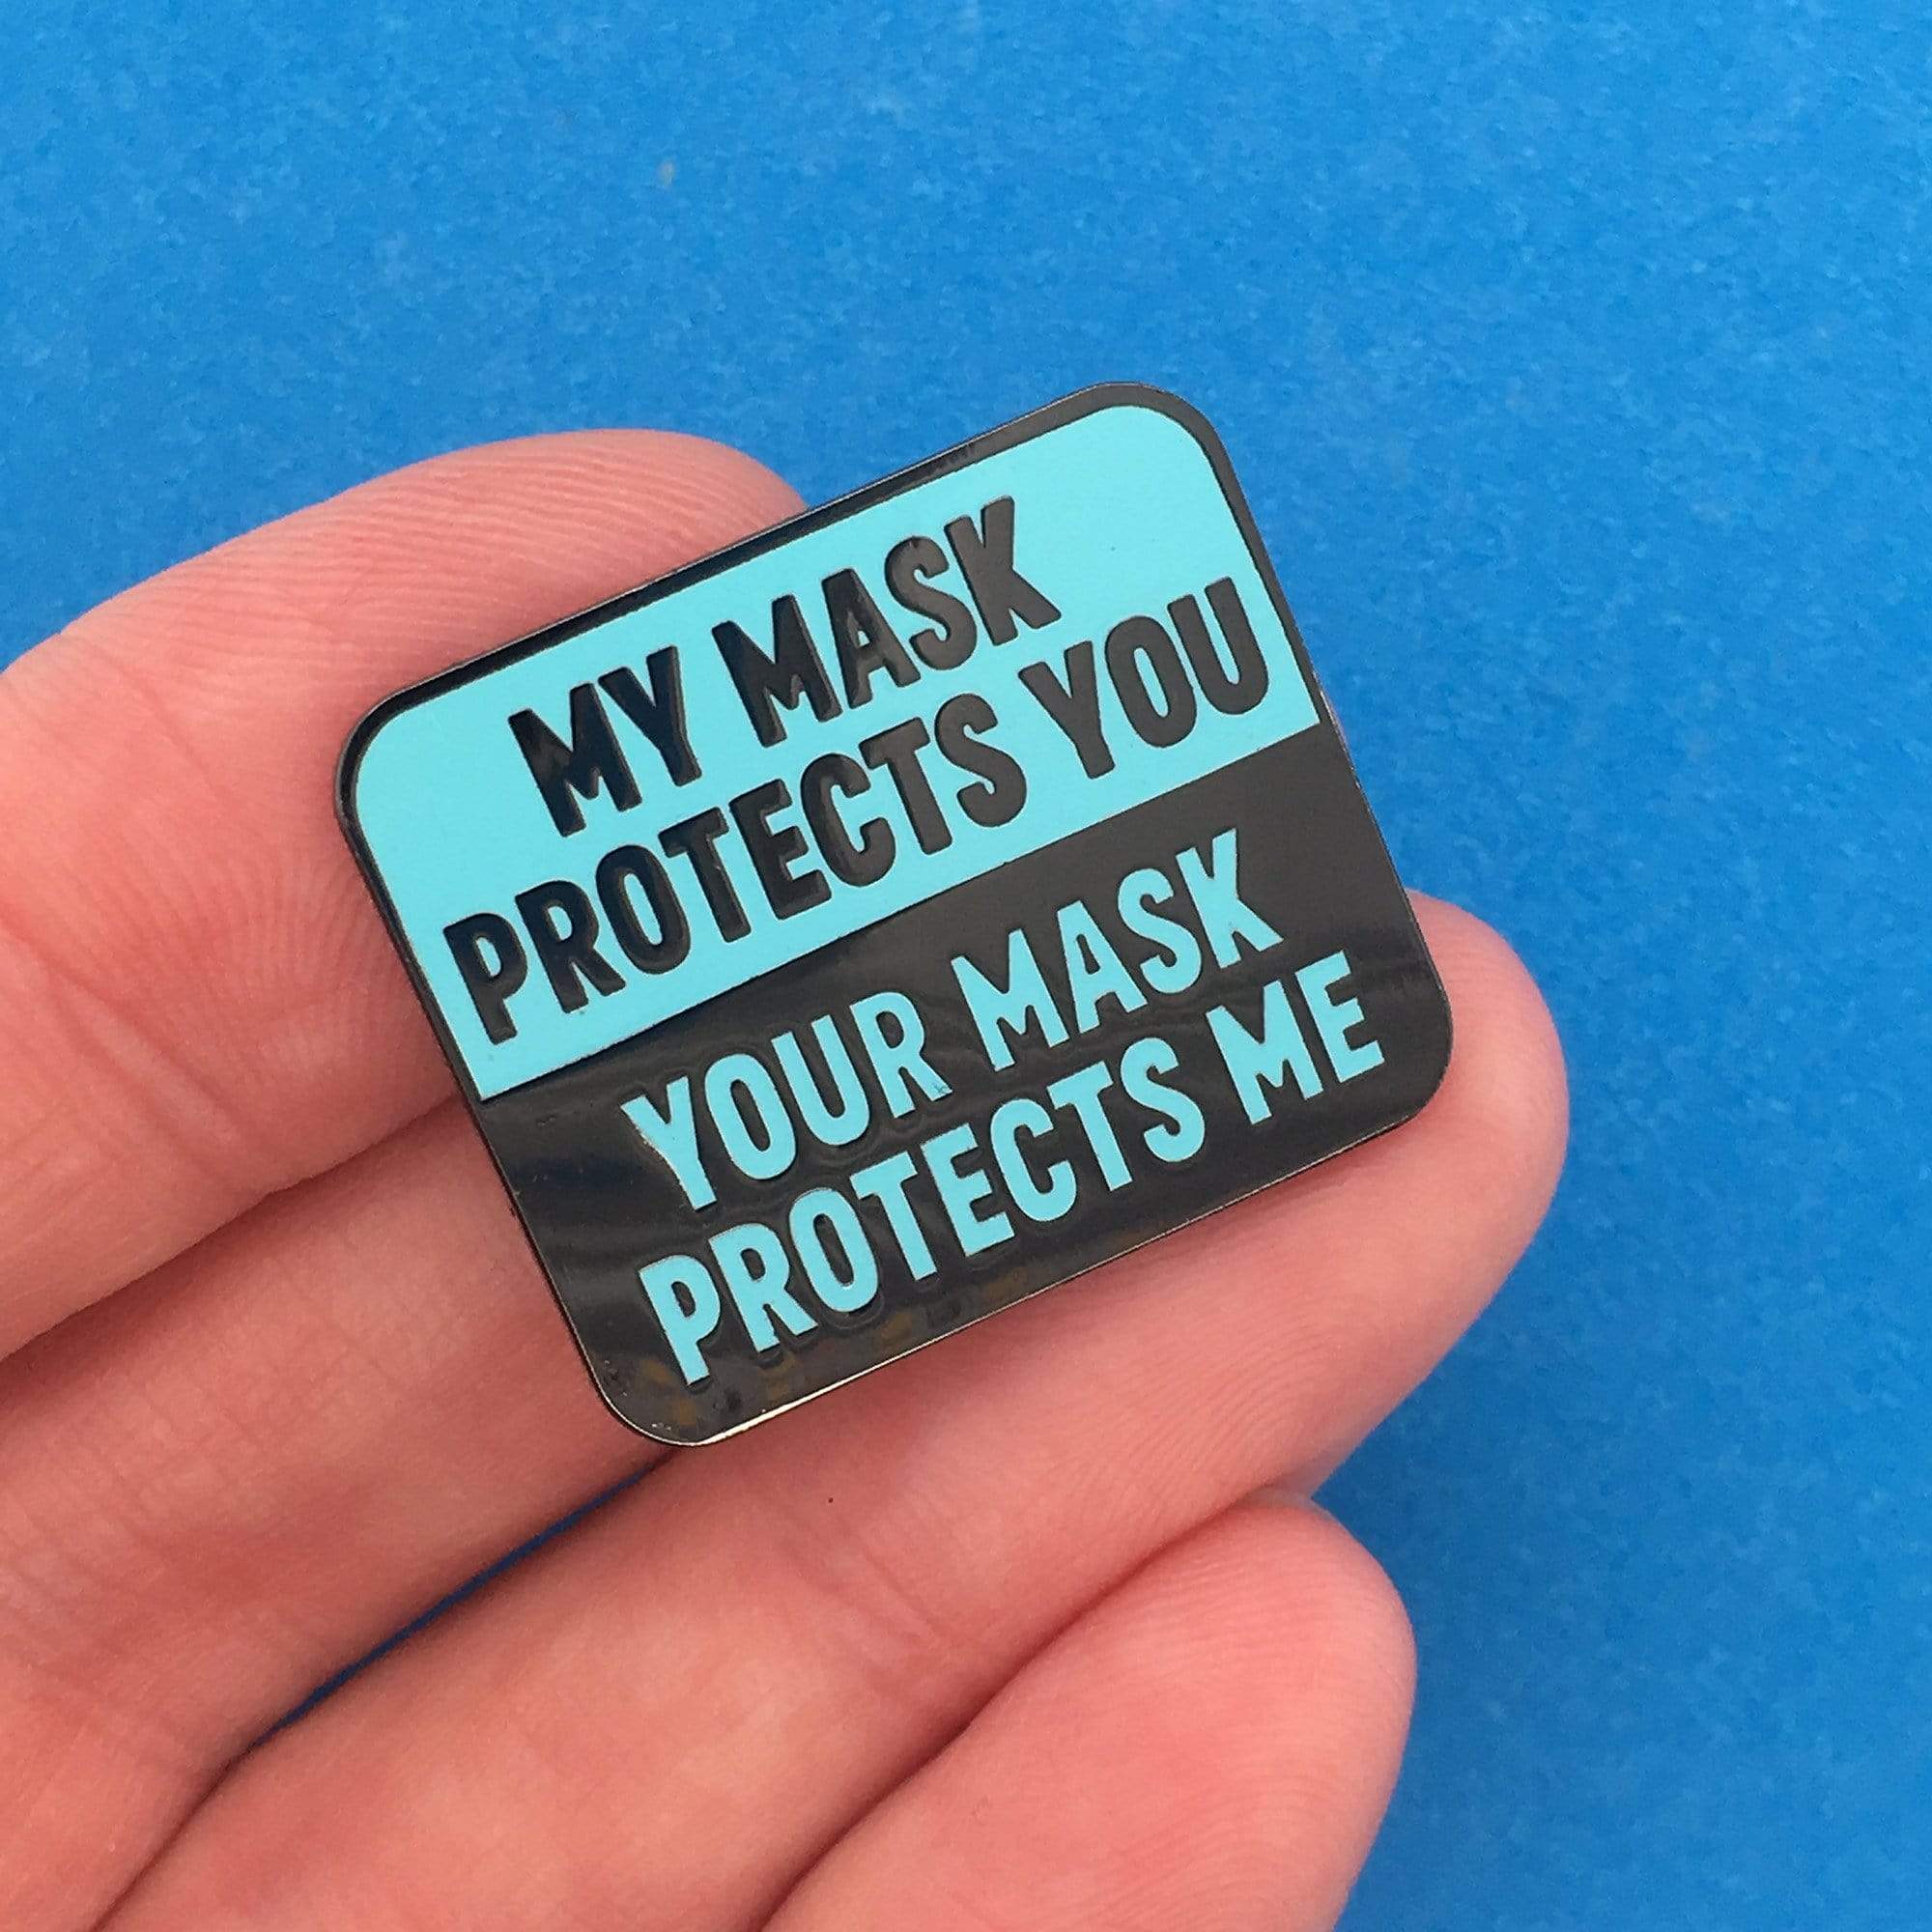 My Mask Protects You Magnet